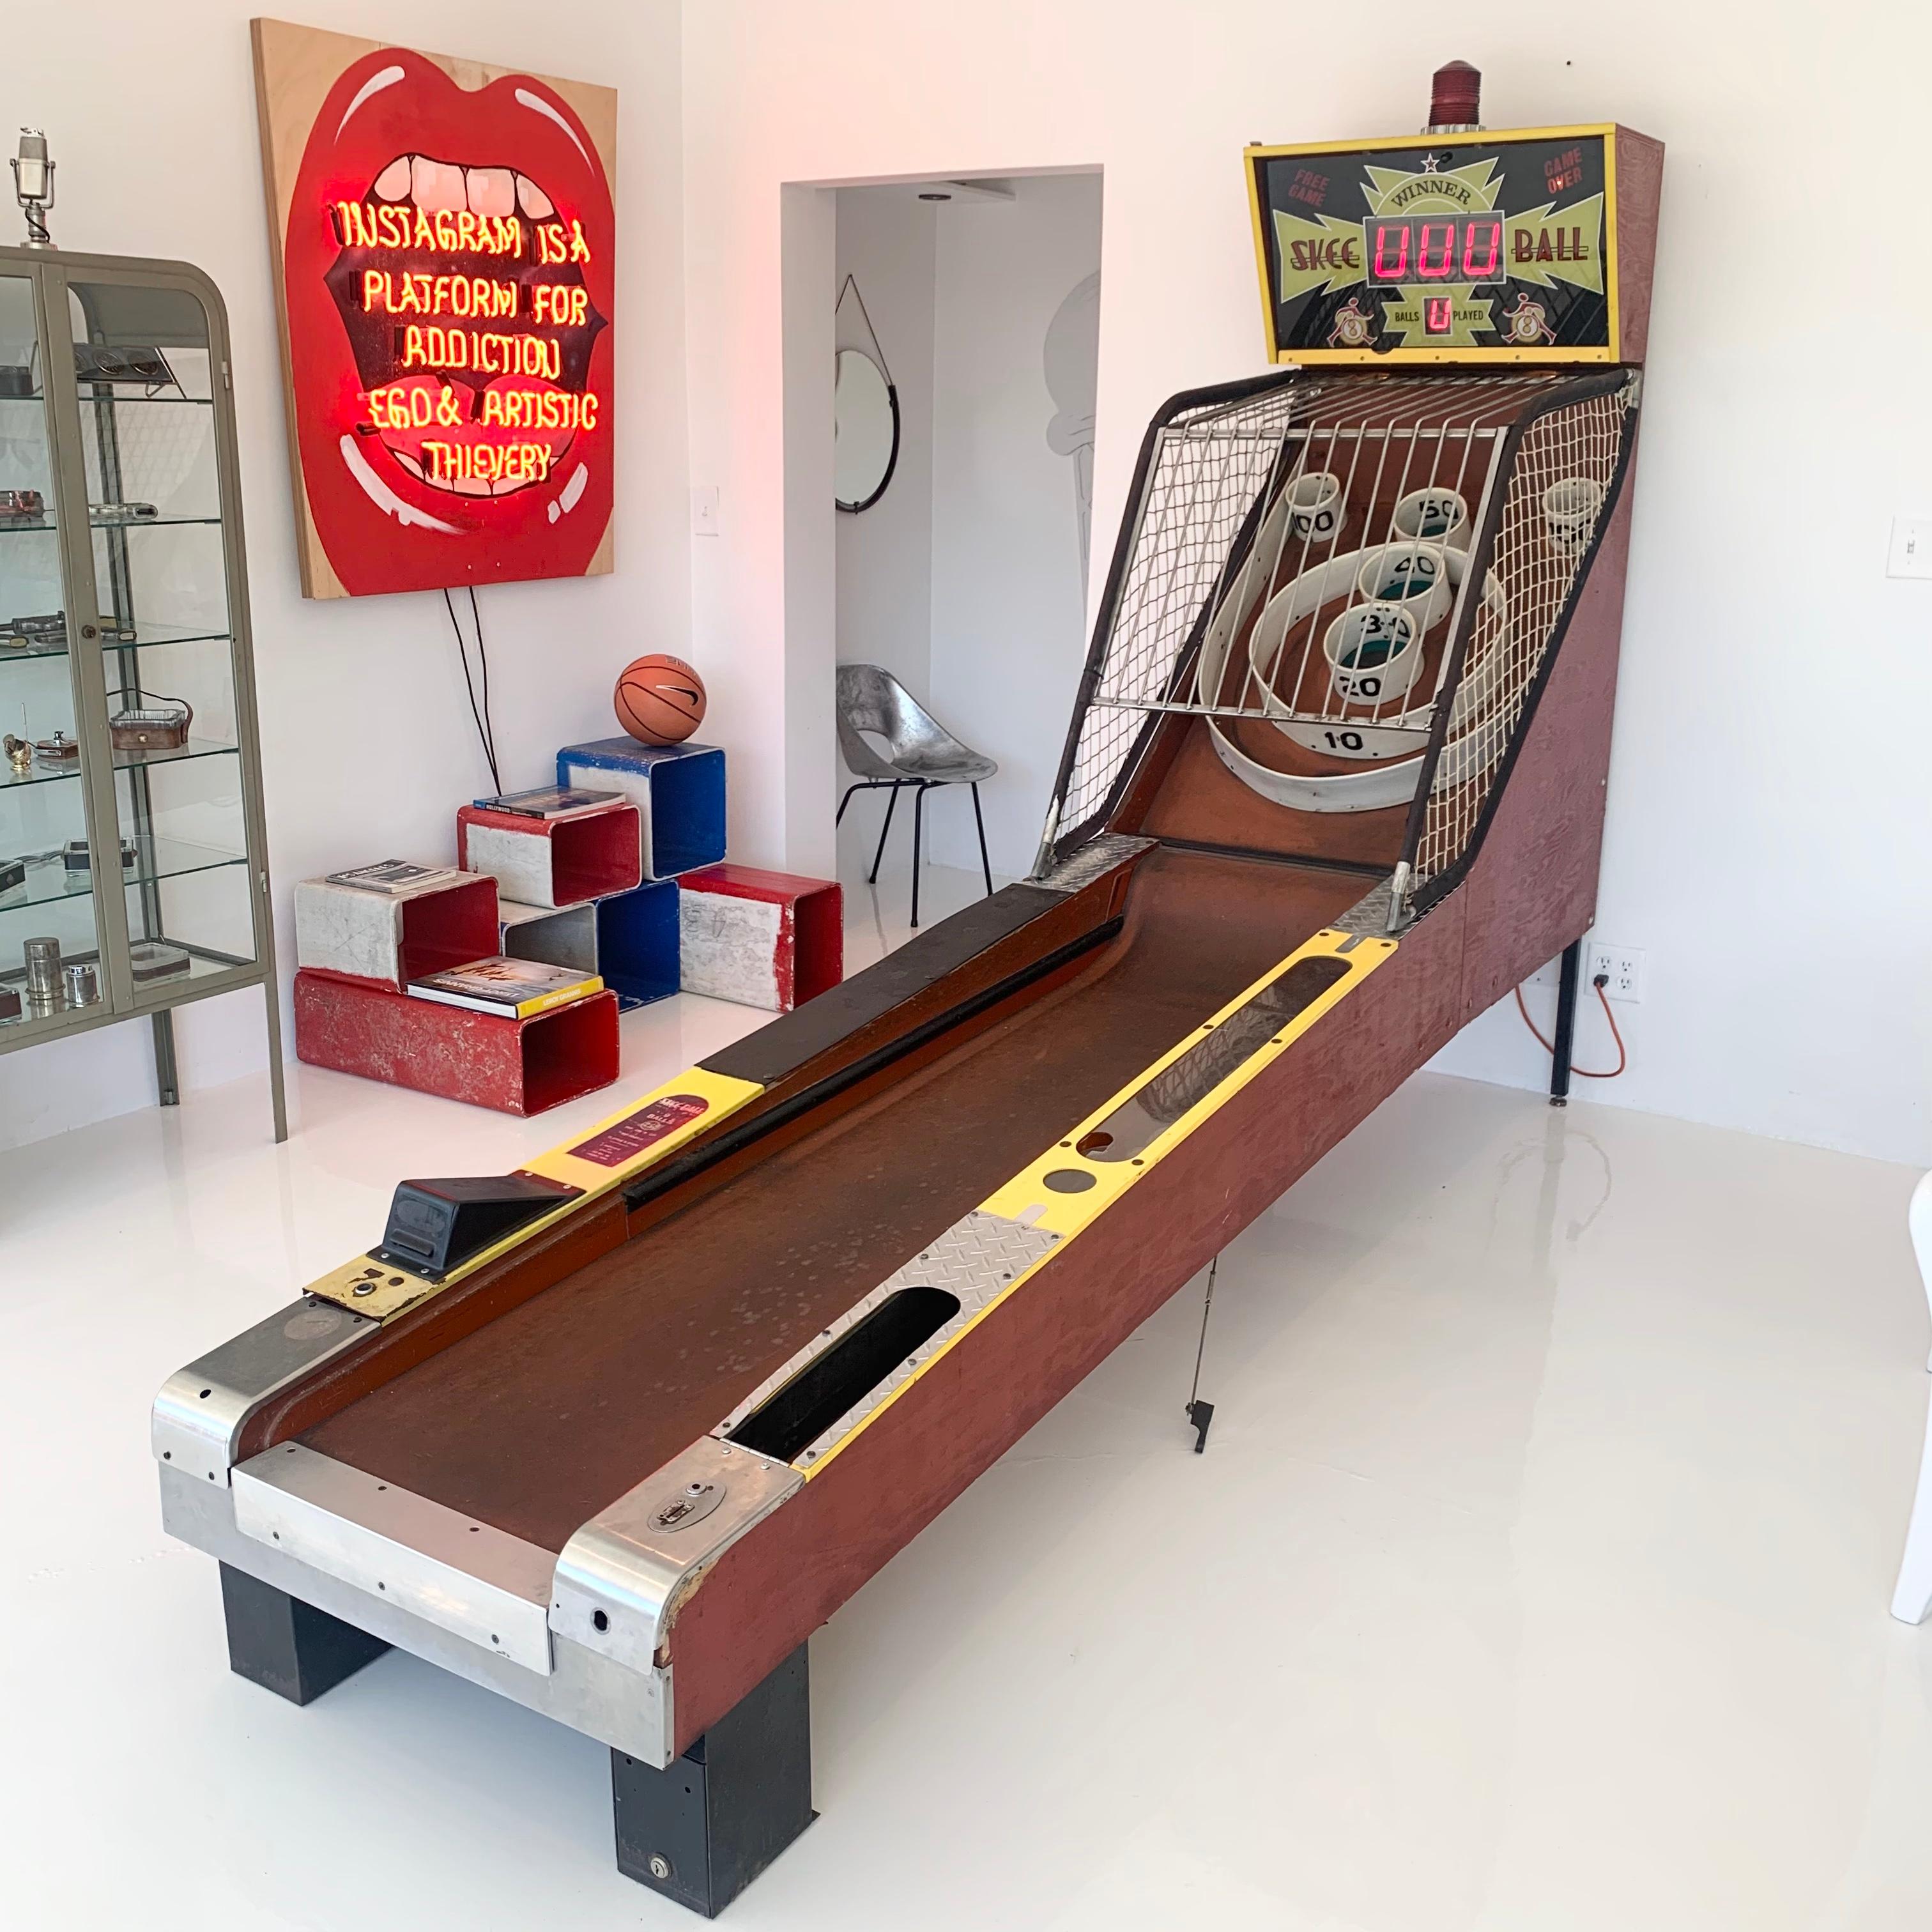 Cool vintage Skee-Ball machine in great working condition. Retired from a Redondo Beach, California arcade. 9 vintage wood balls included. Coin-operated with light up scoreboard. Just over 10 feet long. Everything works as it should. Wear